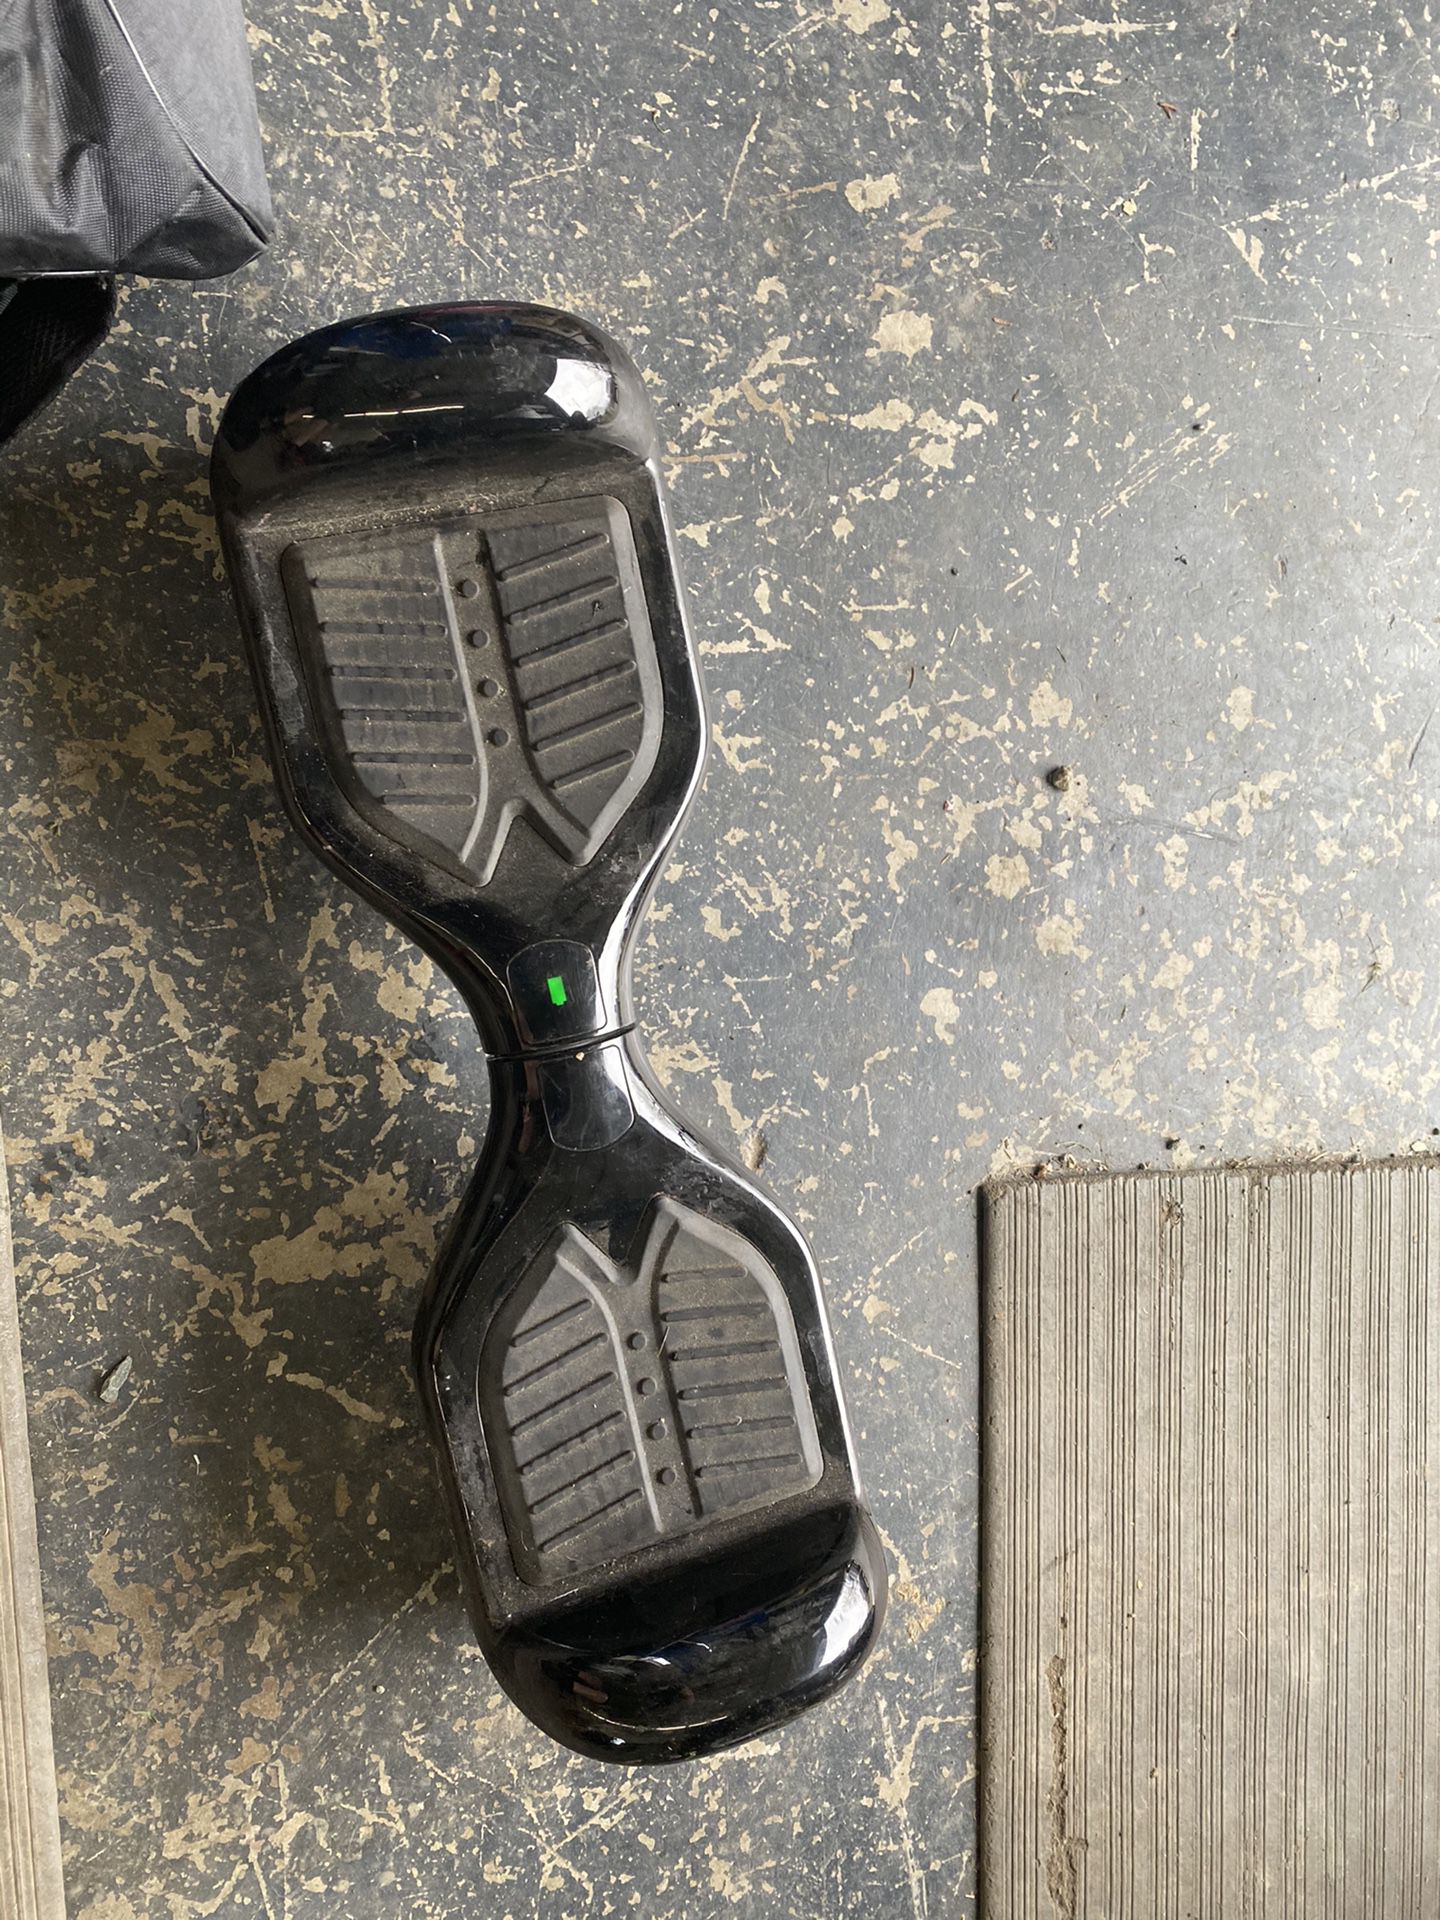 Hoverboard For Sale